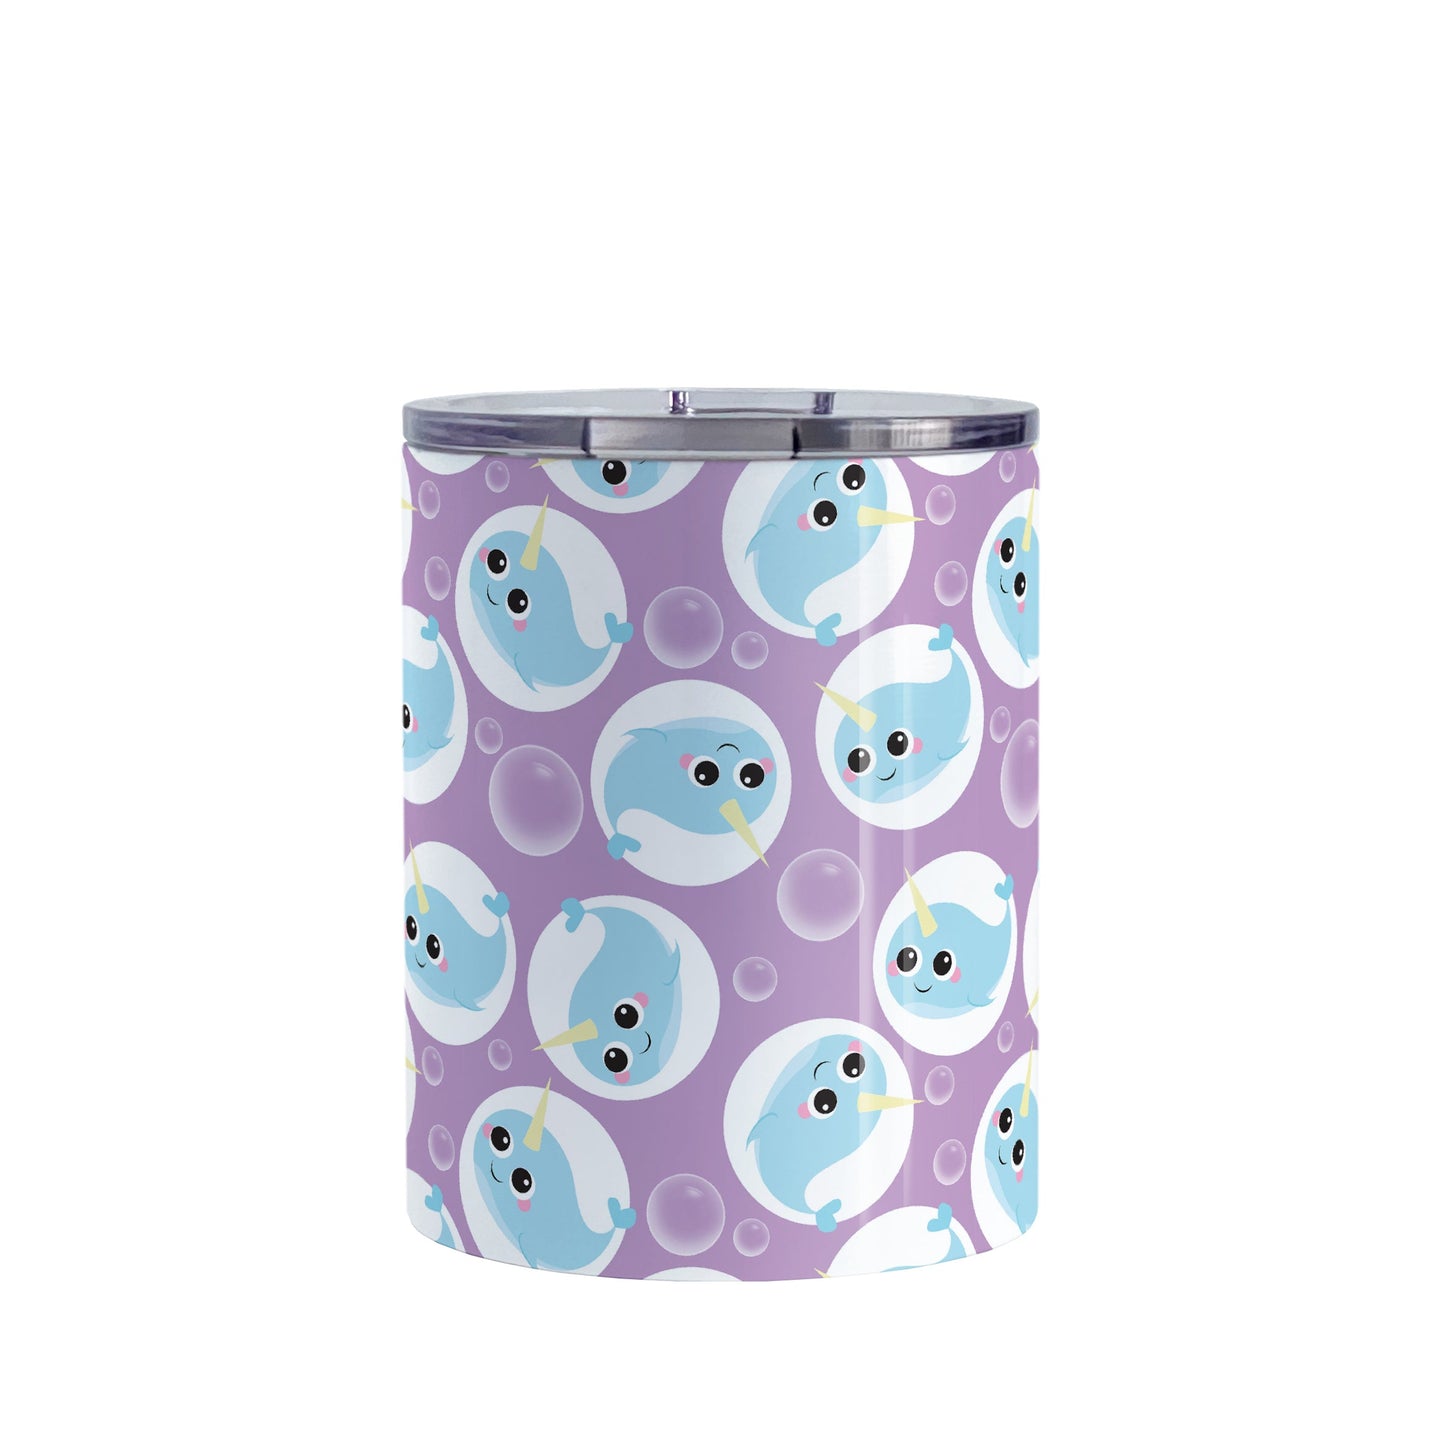 Cute Purple Narwhal Bubble Pattern Tumbler Cup (10oz, stainless steel insulated) at Amy's Coffee Mugs